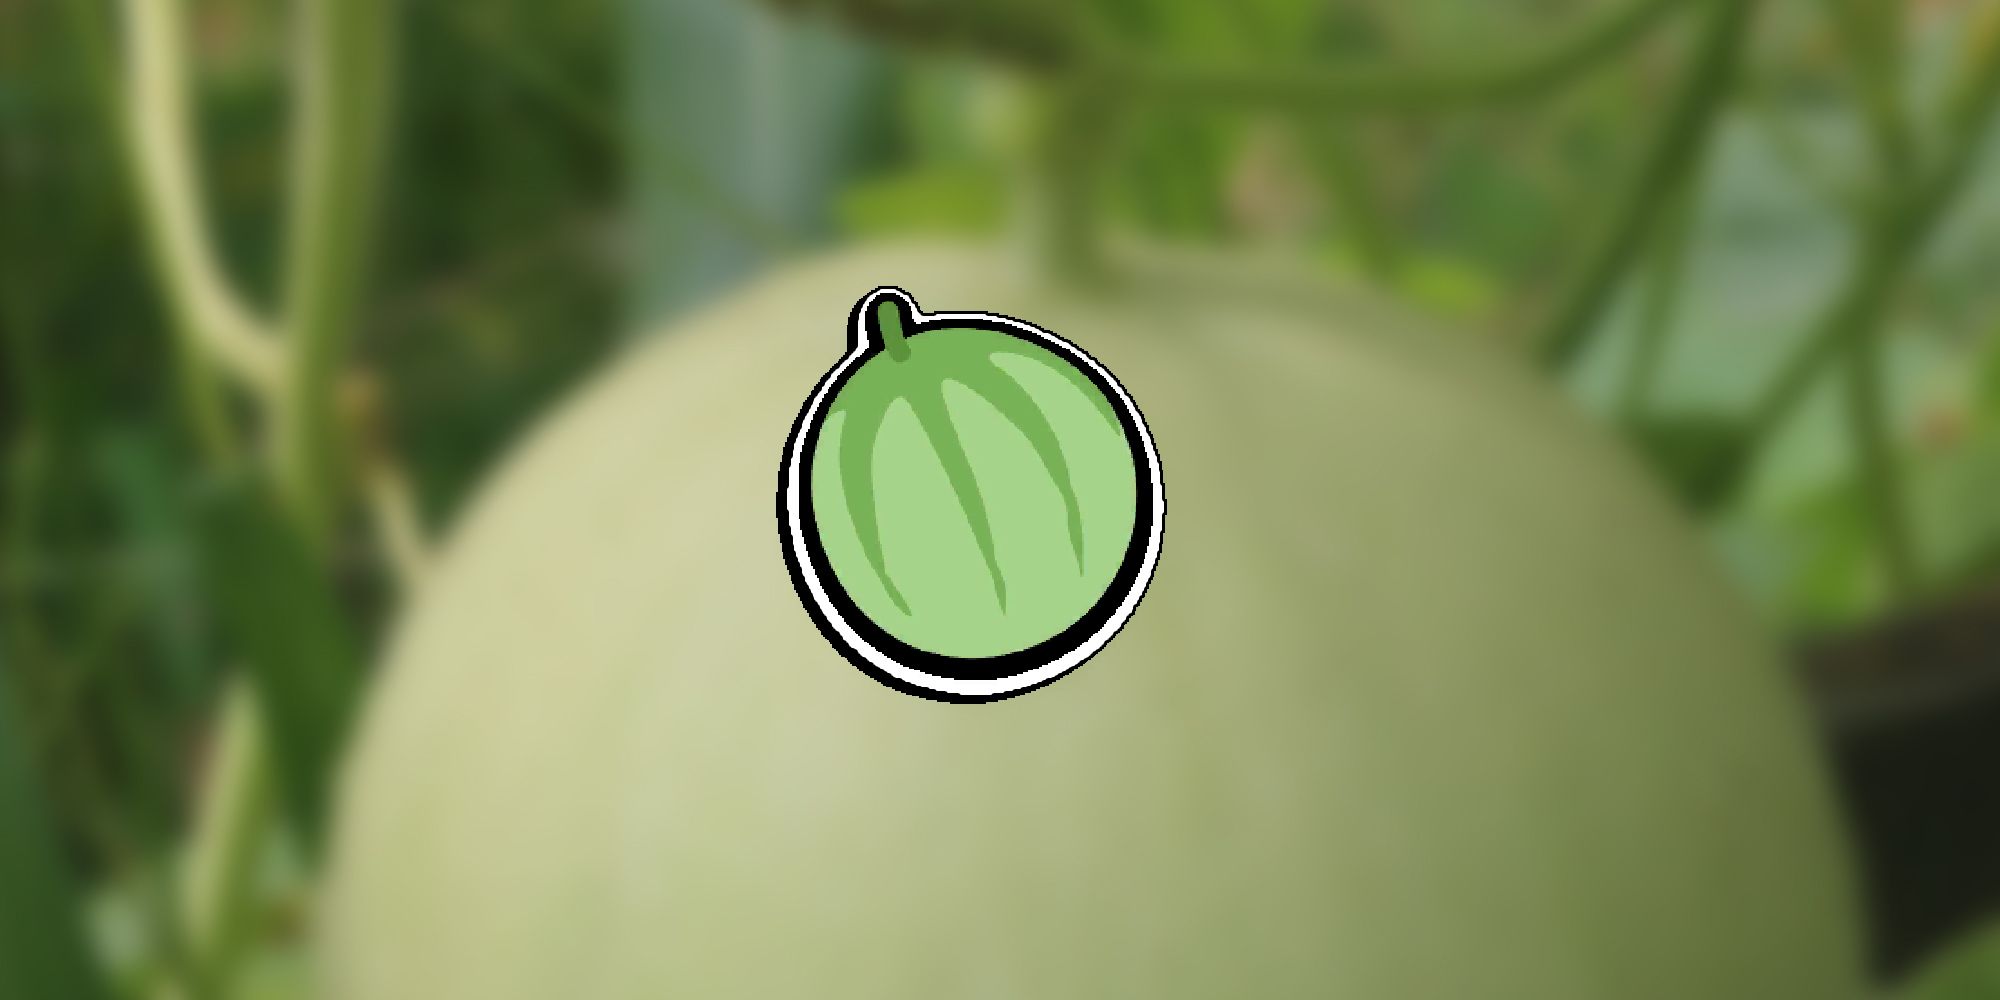 Super Auto Pets - In-Game Melon Item PNG Overlaid On Image Of Melon The Item Was Based On